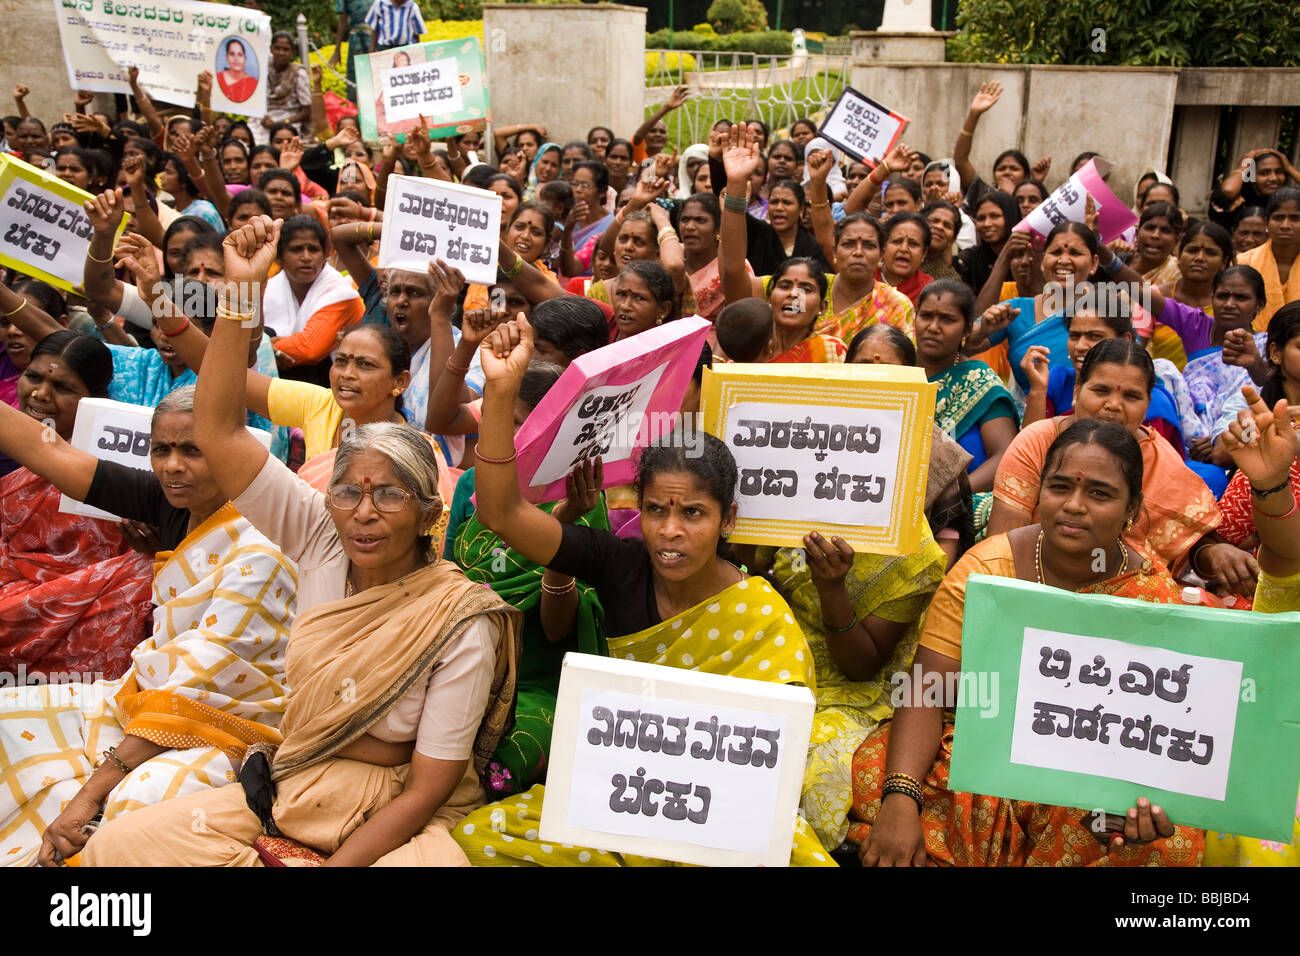 Women hold placards during a protest in Bangalore, India. The women are demostrating for women's and dalit (untouchable) rights. Stock Photo